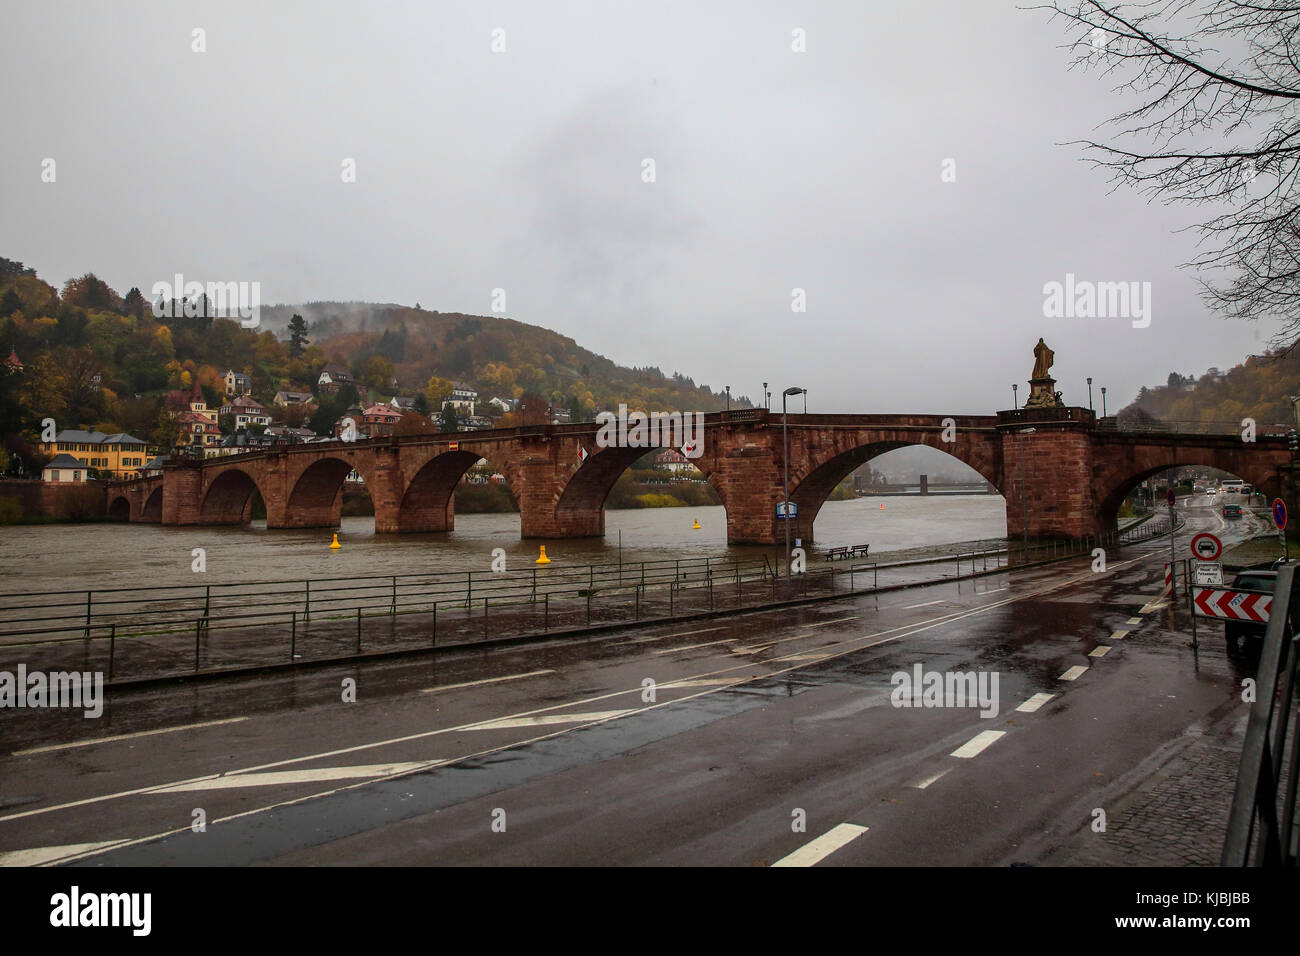 The Karl Theodor Bridge, commonly known as the Old Bridge, is a stone bridge in Heidelberg, crossing the Neckar River. Stock Photo